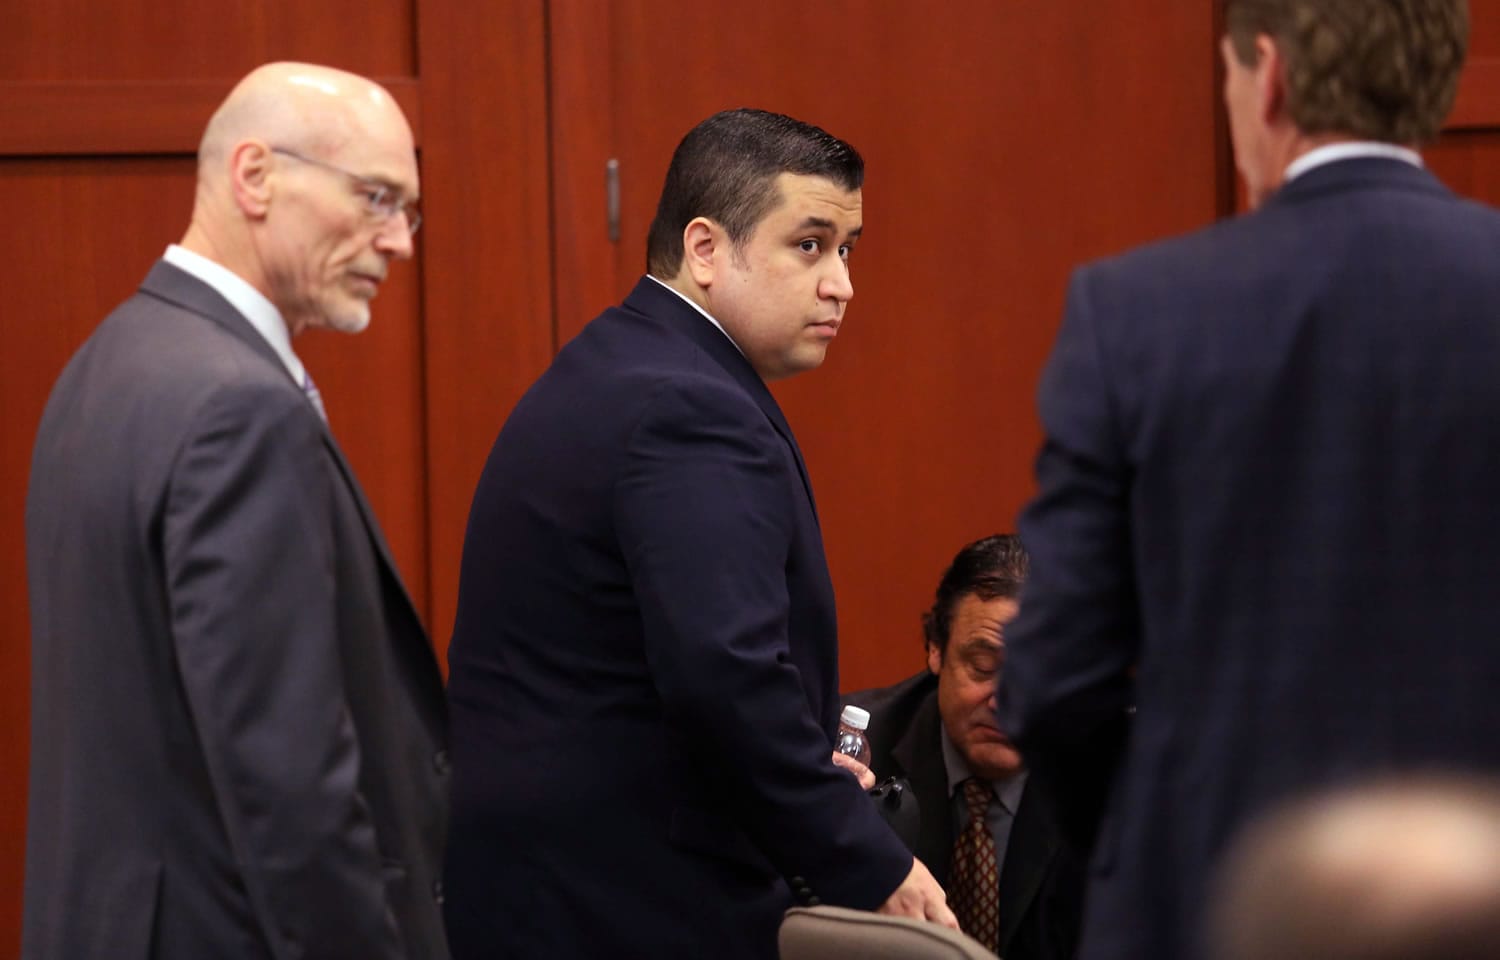 George Zimmerman, center, arrives in Seminole circuit court, with co-counsel Don West, left, and defense attorney Mark O'Mara, right, on the first day of his trial Monday in Sanford, Fla.